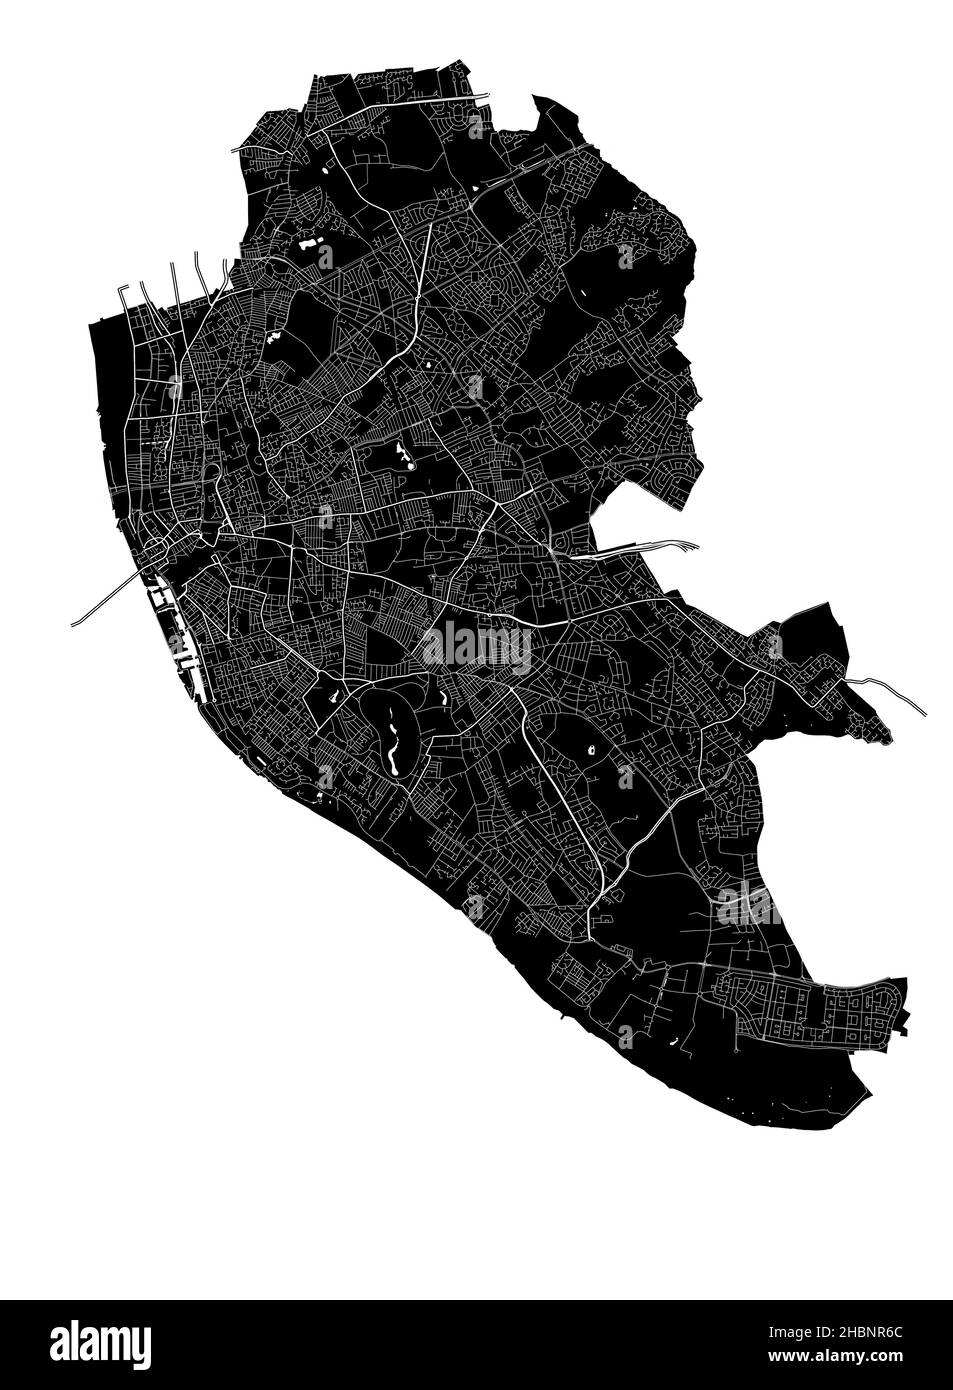 Liverpool, England, high resolution vector map with city boundaries, and editable paths. The city map was drawn with white areas and lines for main ro Stock Vector